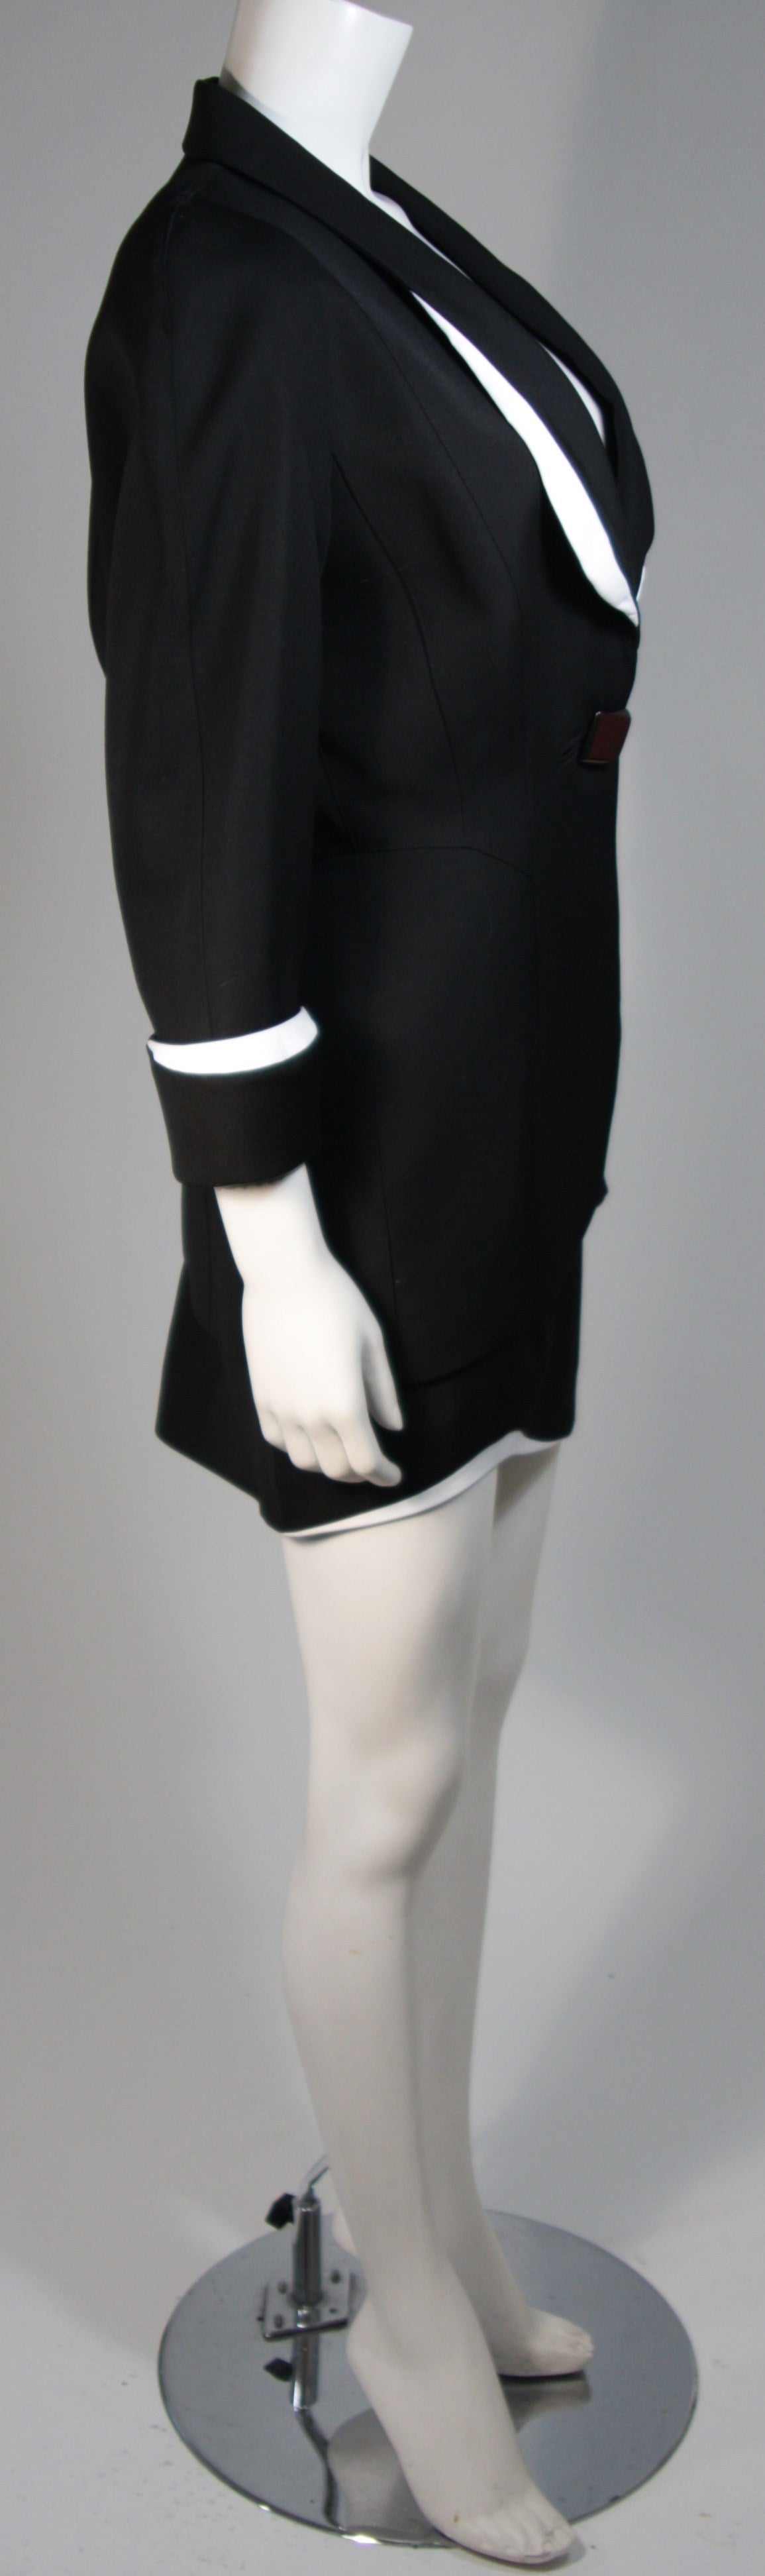 Thierry Mugler Black & White Skirt Suit w.Three Dimensional Lapel & Cuff detail In Excellent Condition For Sale In Los Angeles, CA